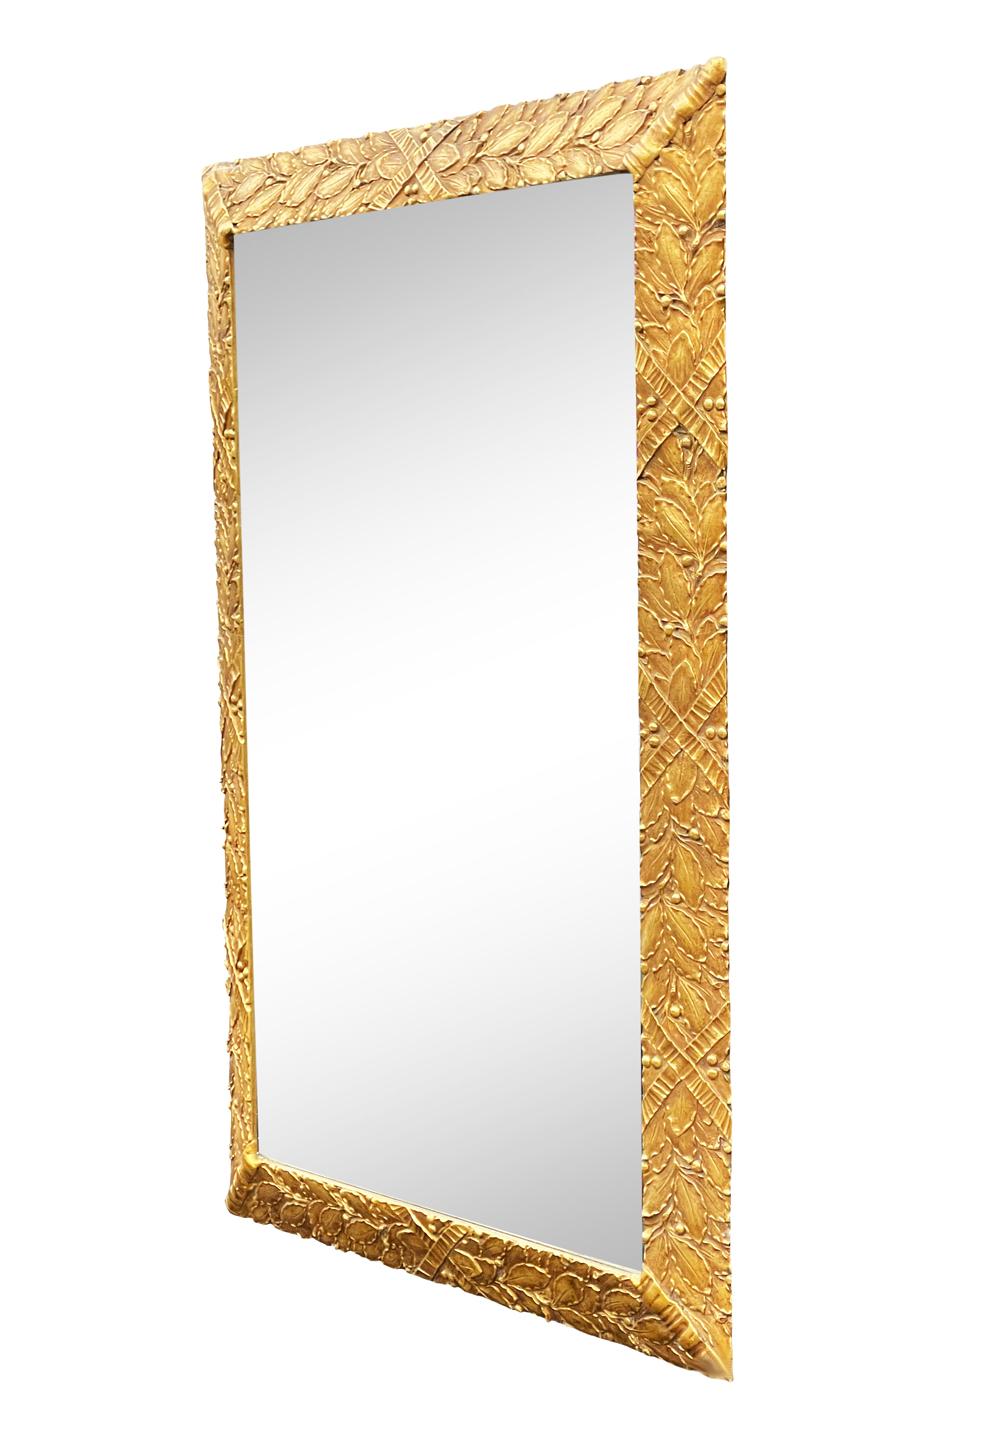 Hollywood Regency Large Italian Rectangular Mirror in Gold Gilded Carved Wood For Sale 2